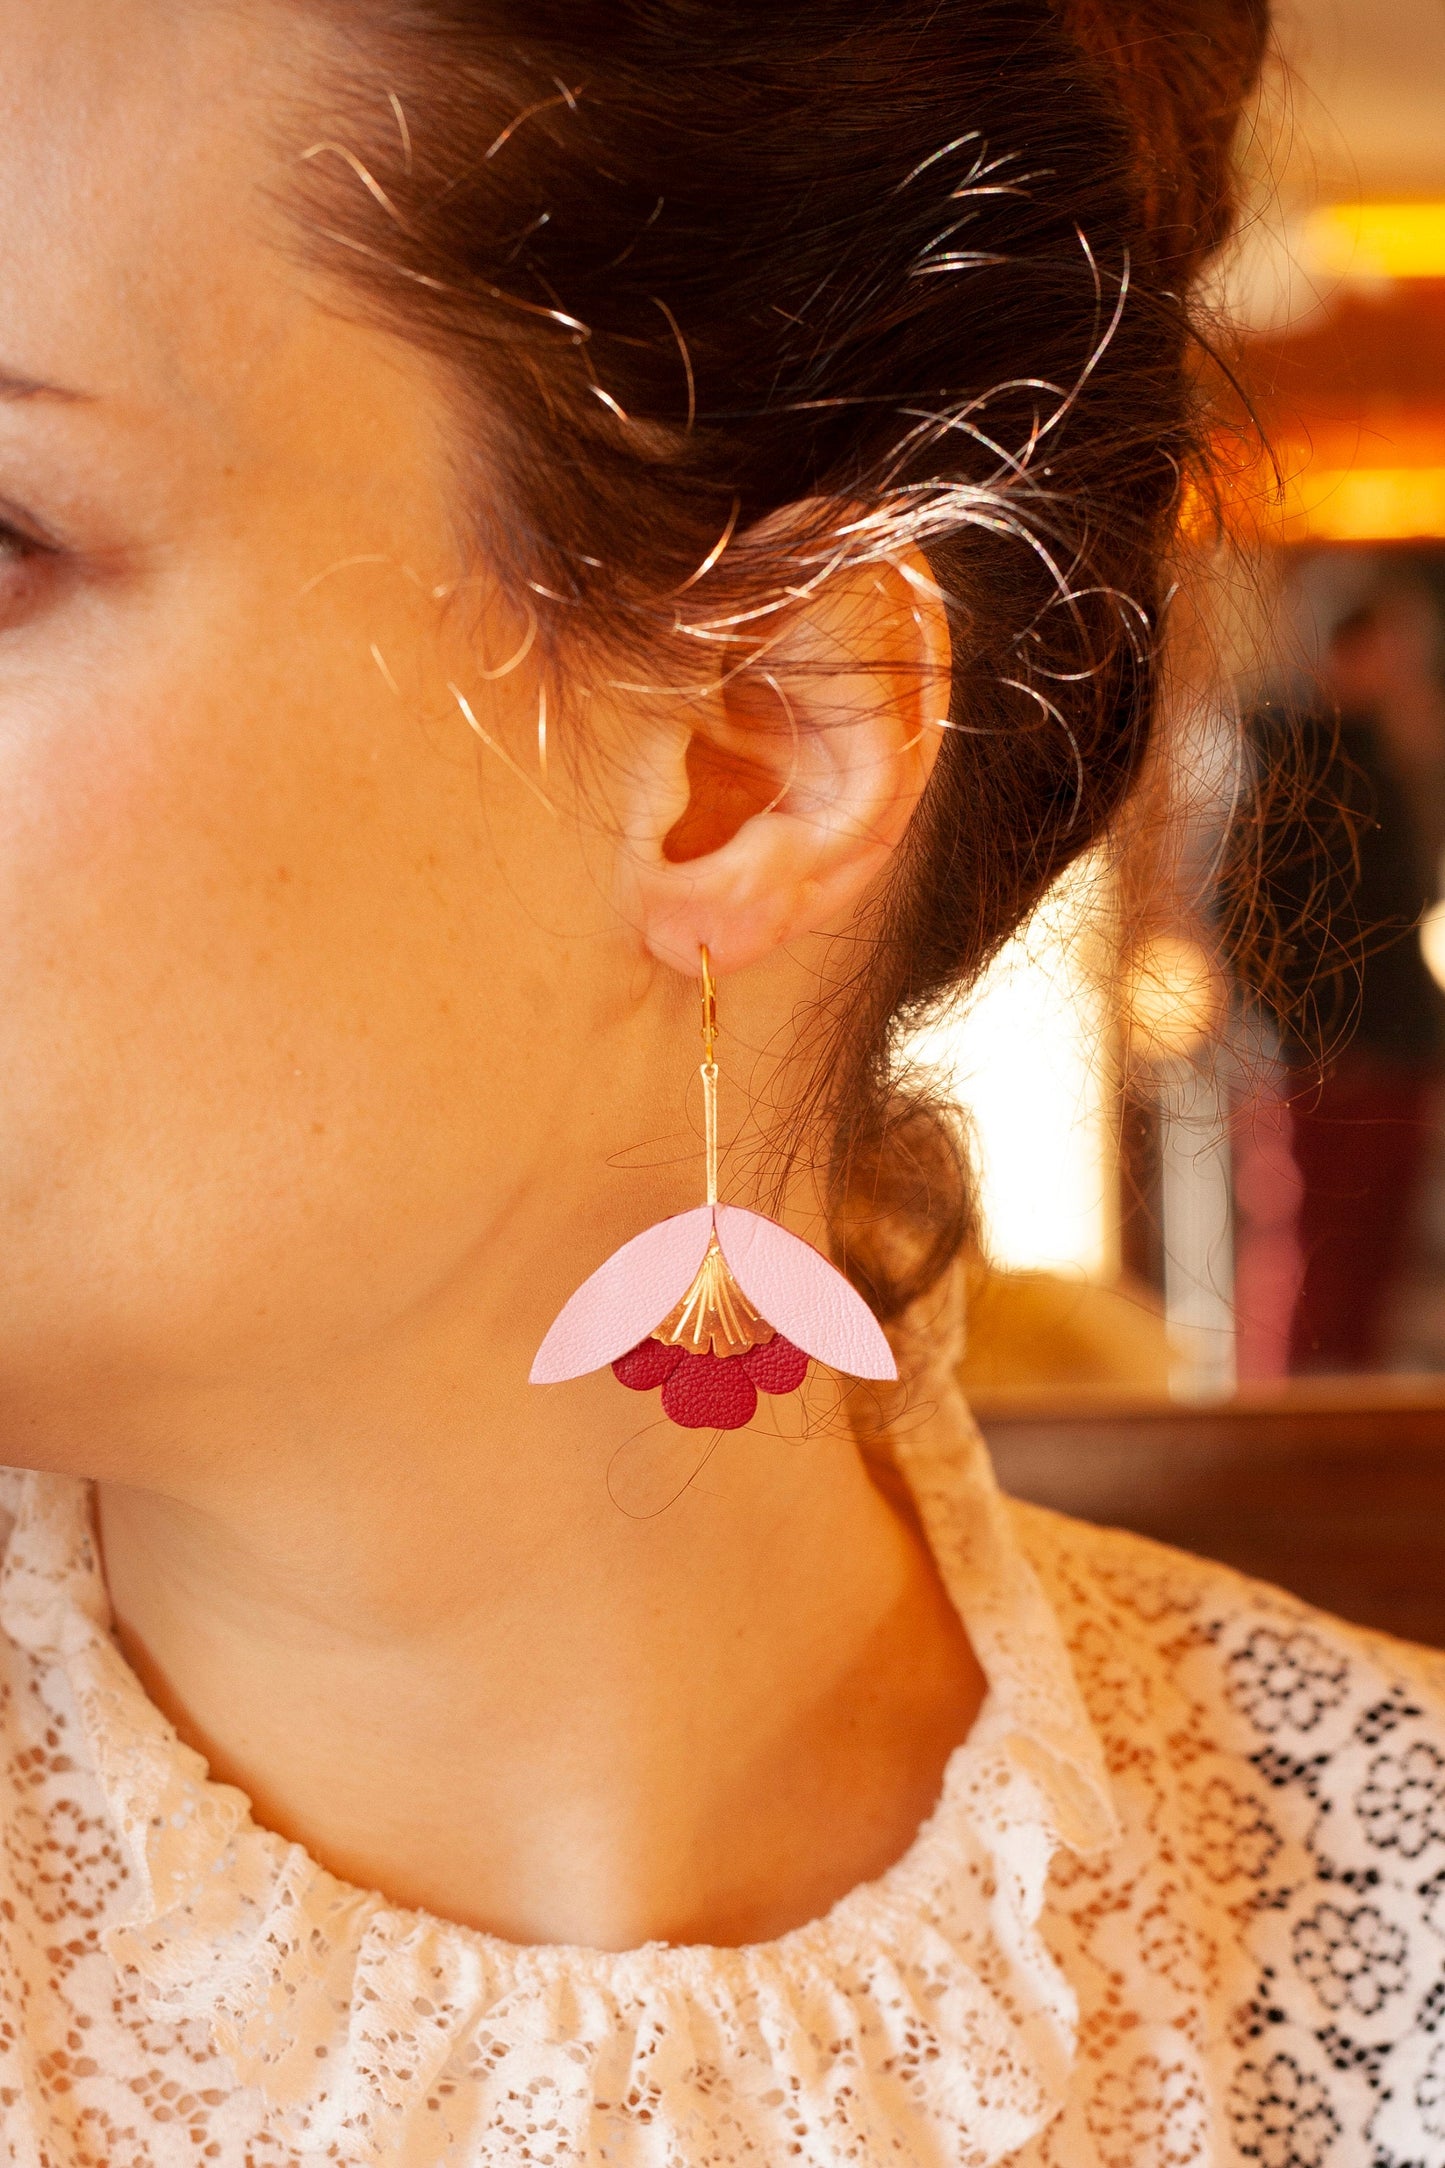 Ginkgo Flower earrings in bright yellow leather and metallic fuchsia pink